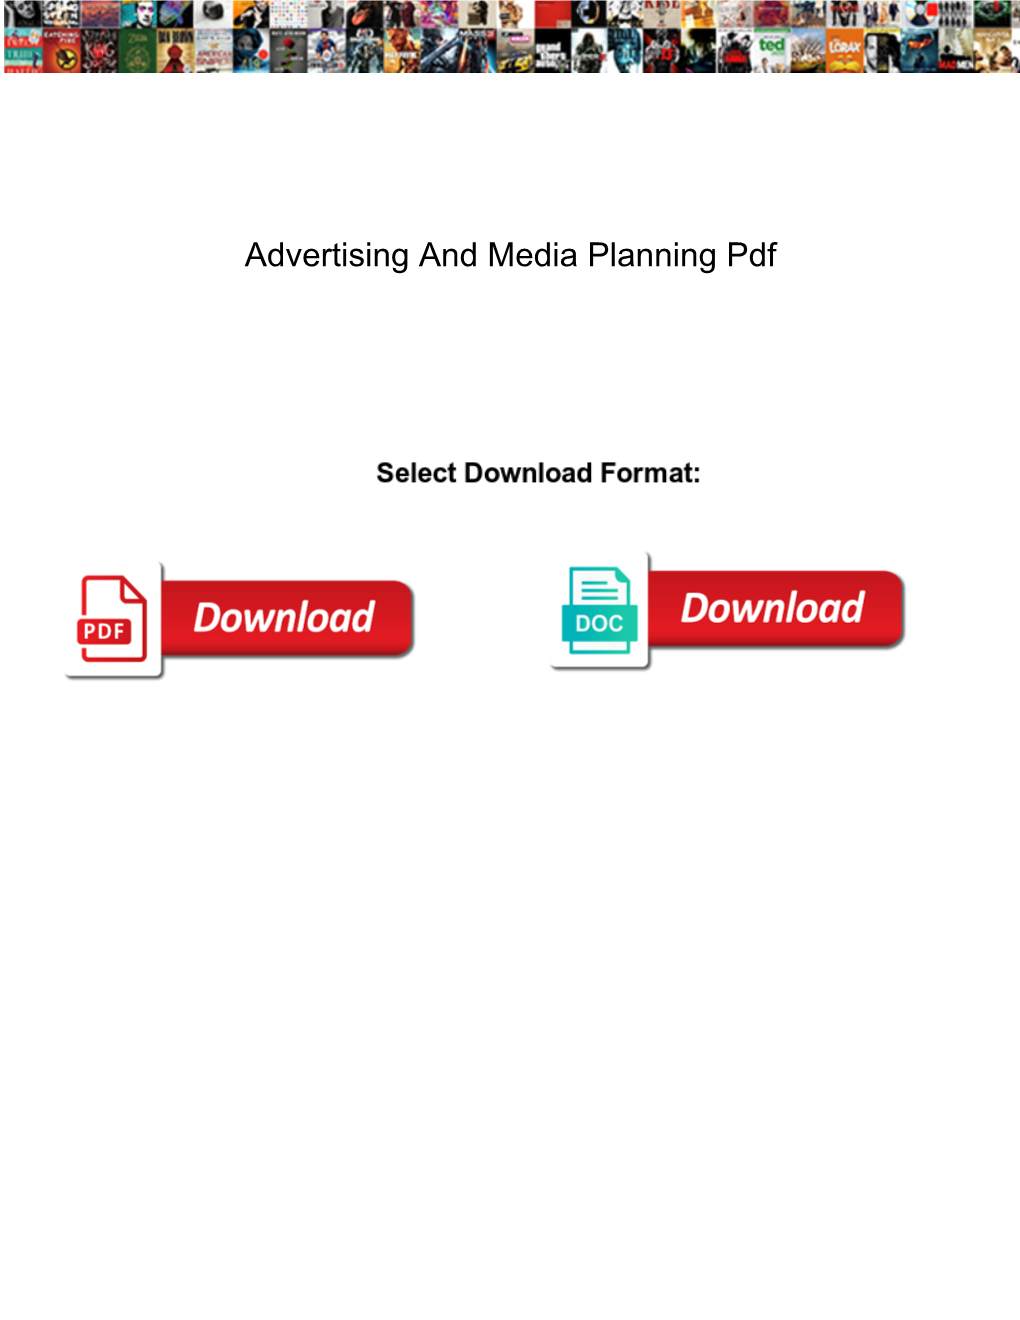 Advertising and Media Planning Pdf